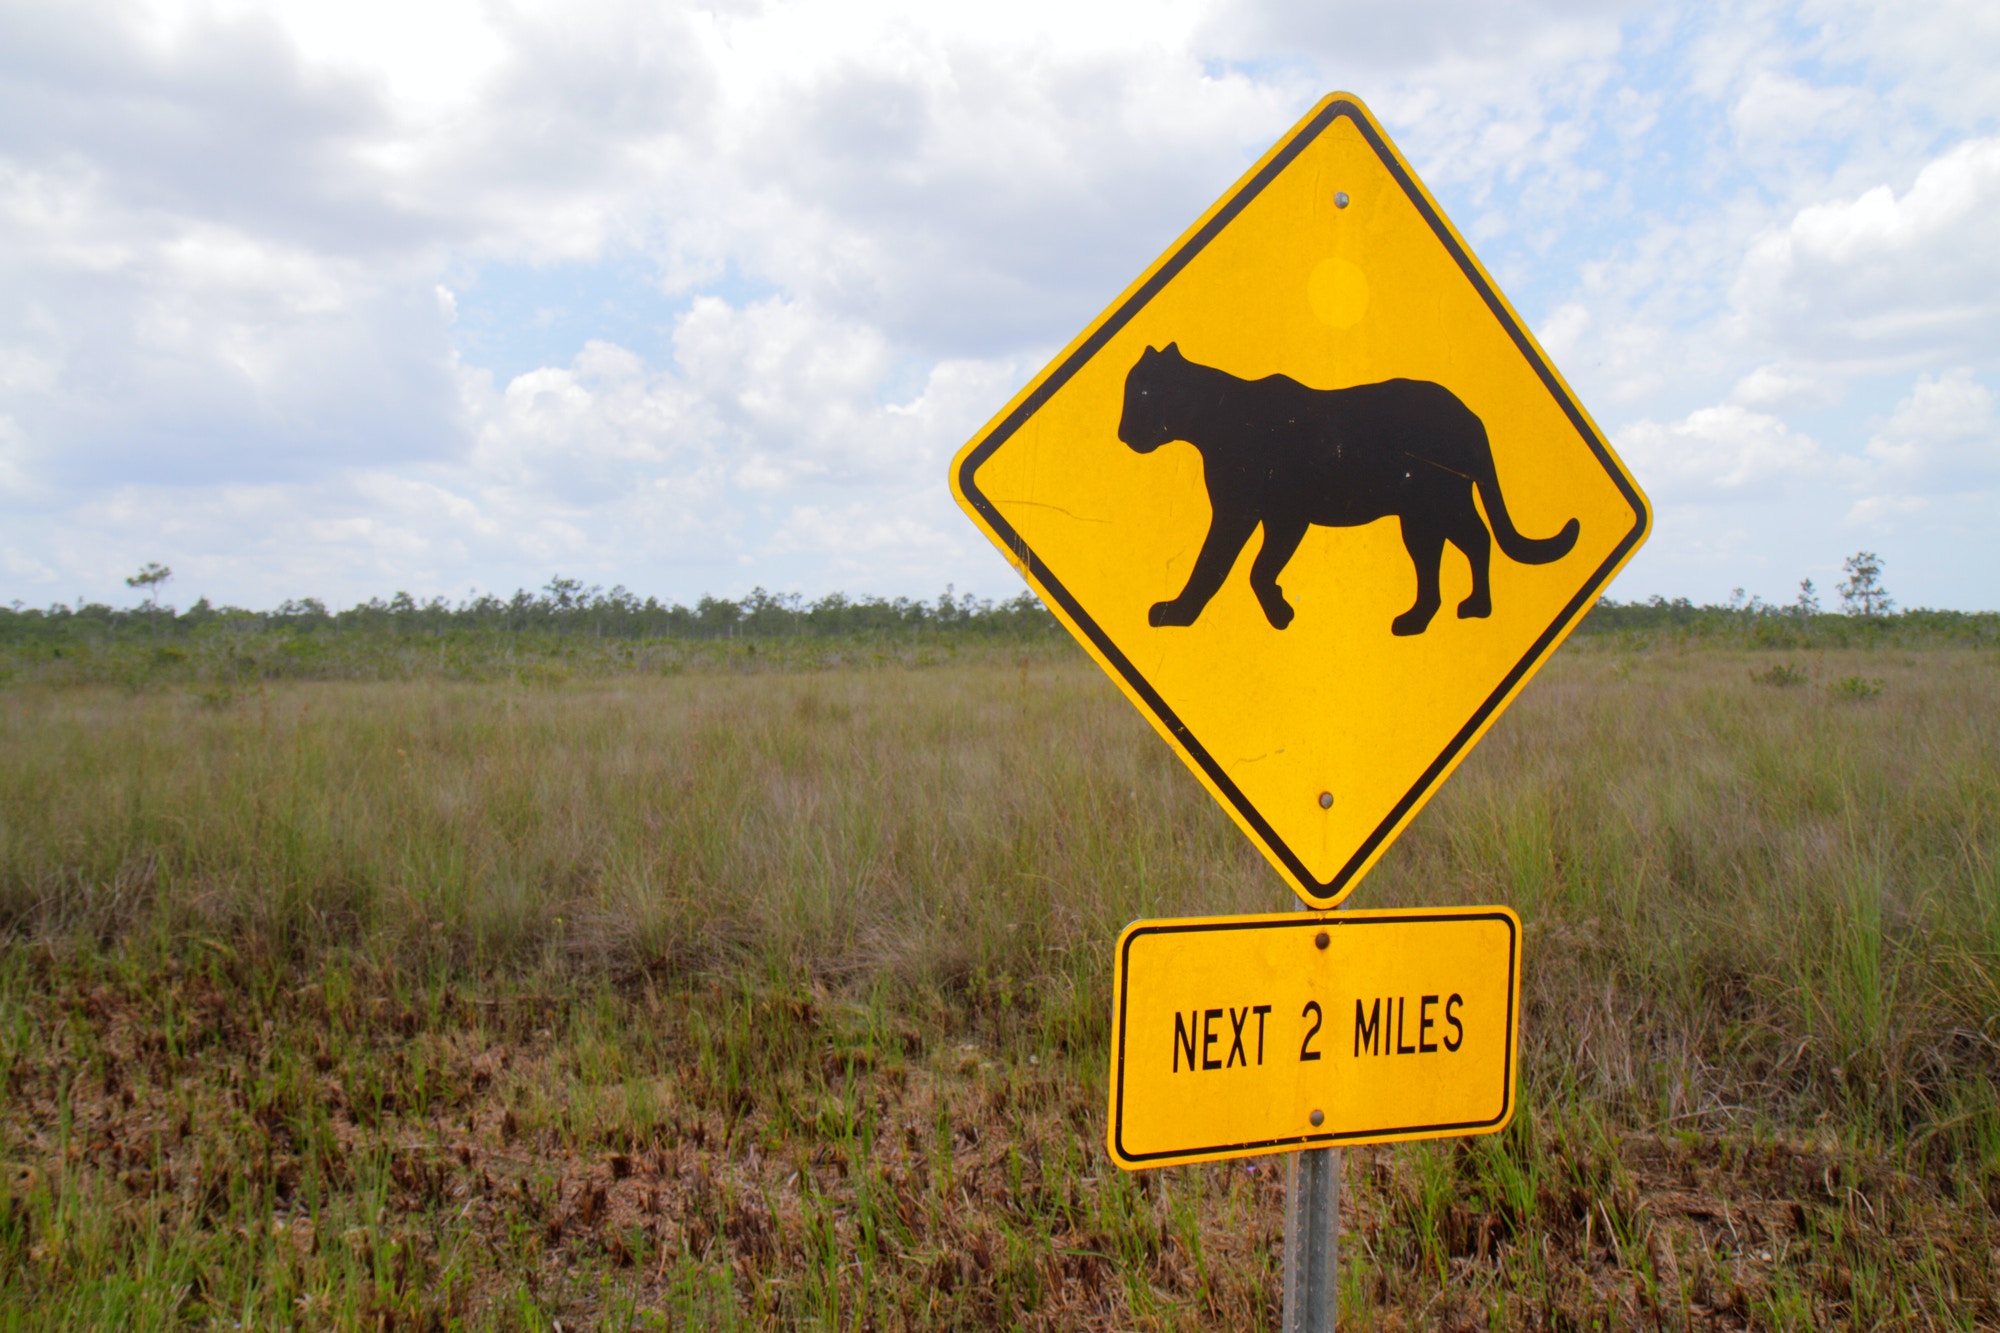 Warning panther crossing sign in Everglades National Park on October 12, 2015.